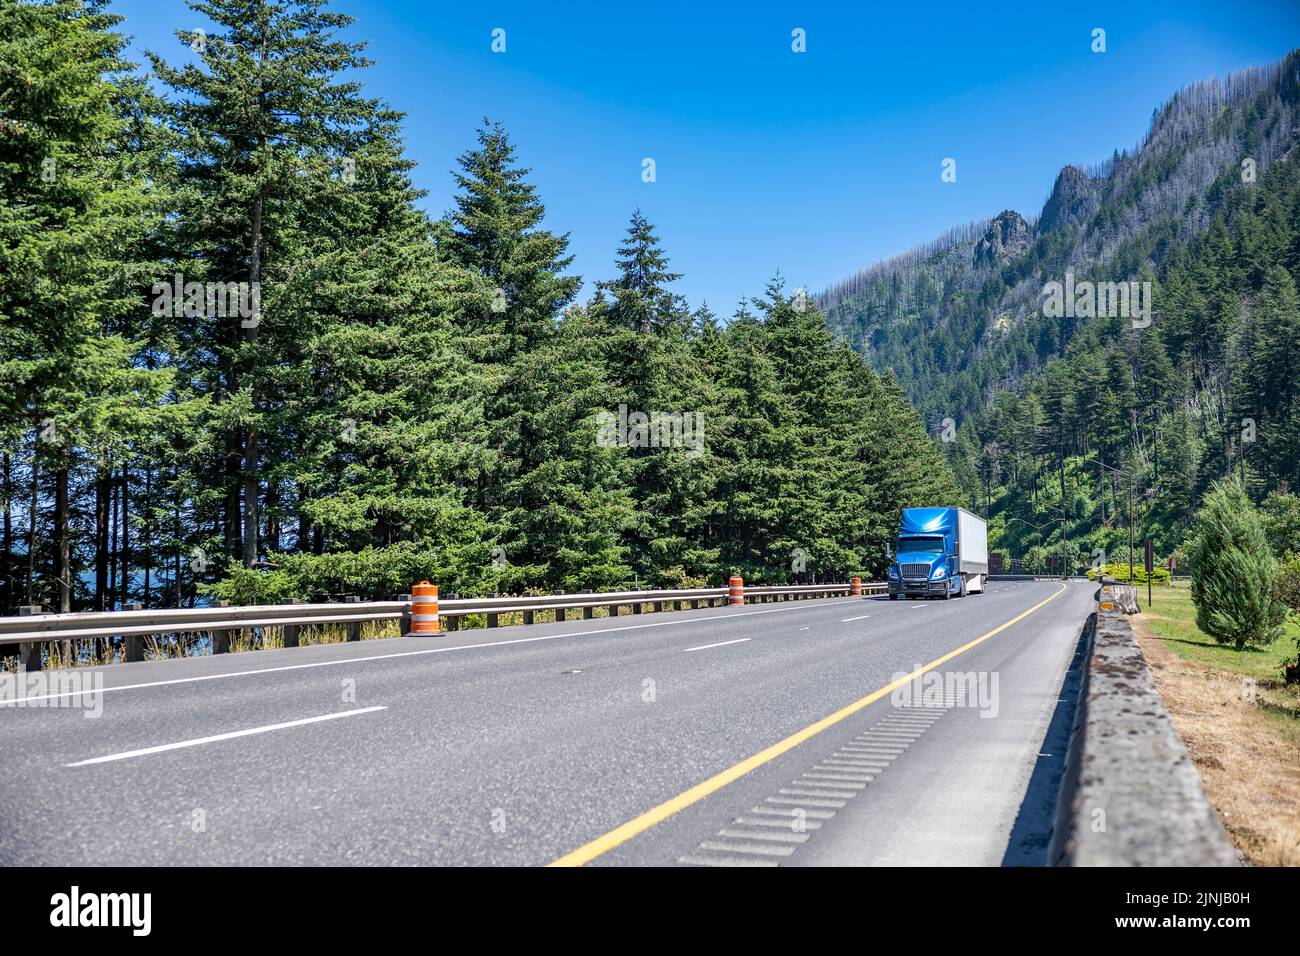 Blue industrial big rig semi truck with truck driver cab sleep compartment transporting cargo in dry van semi trailer running on summer highway road w Stock Photo